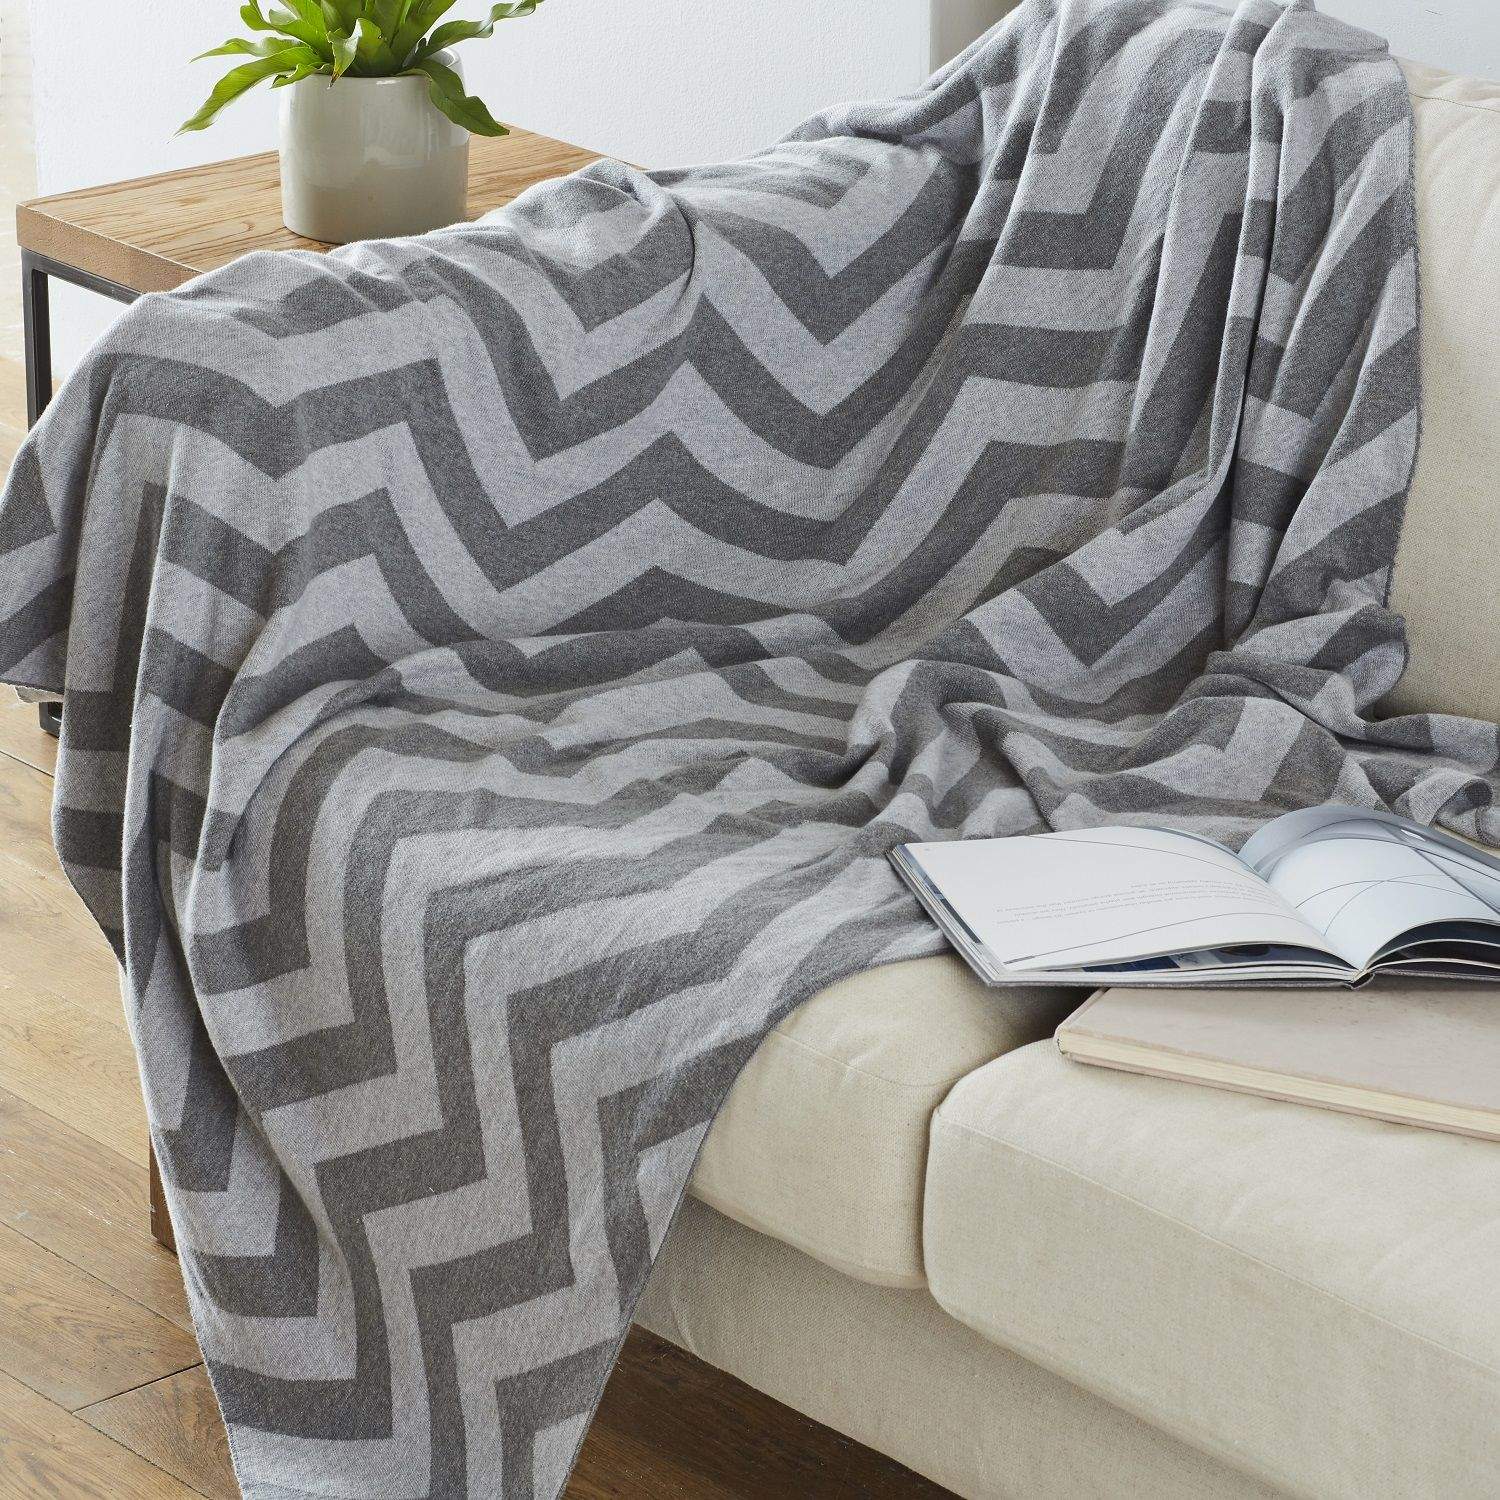 Lightweight Super Soft Knitted Cozy Warm Blanket Throw (125 x 150 cm) Bed and Bath Linen